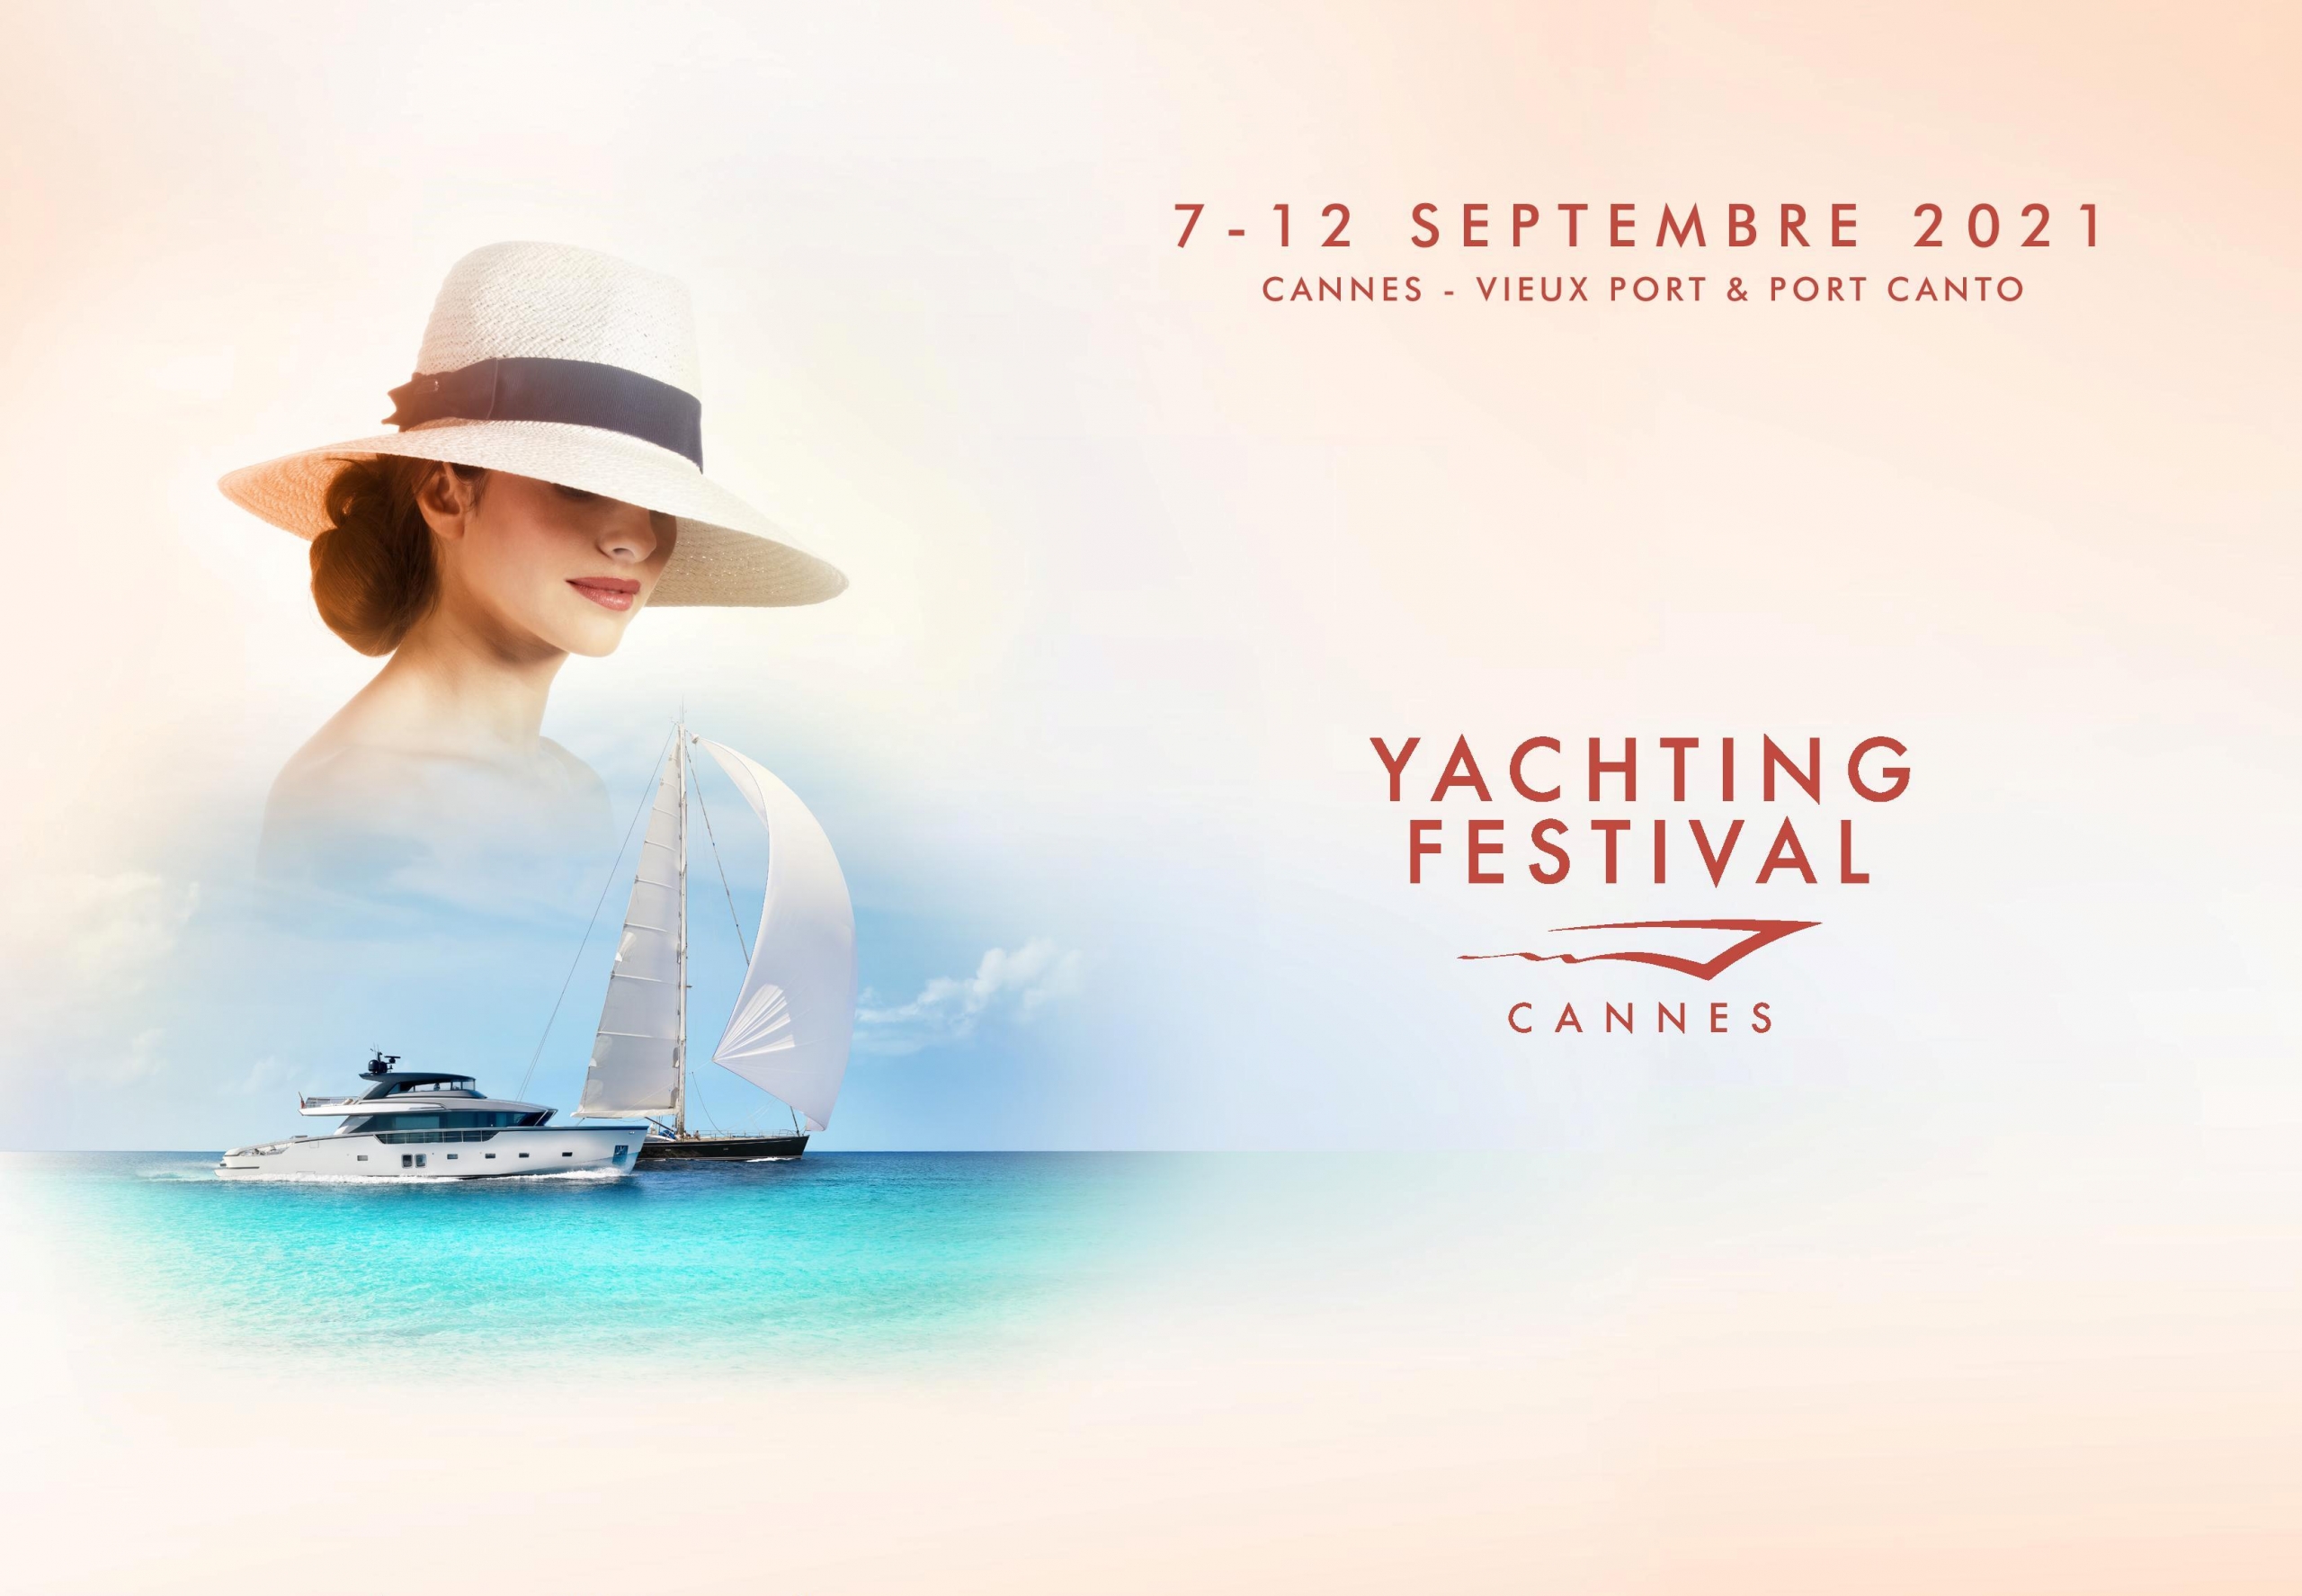 Cannes Yachting Festival 2021 - Yachts Invest